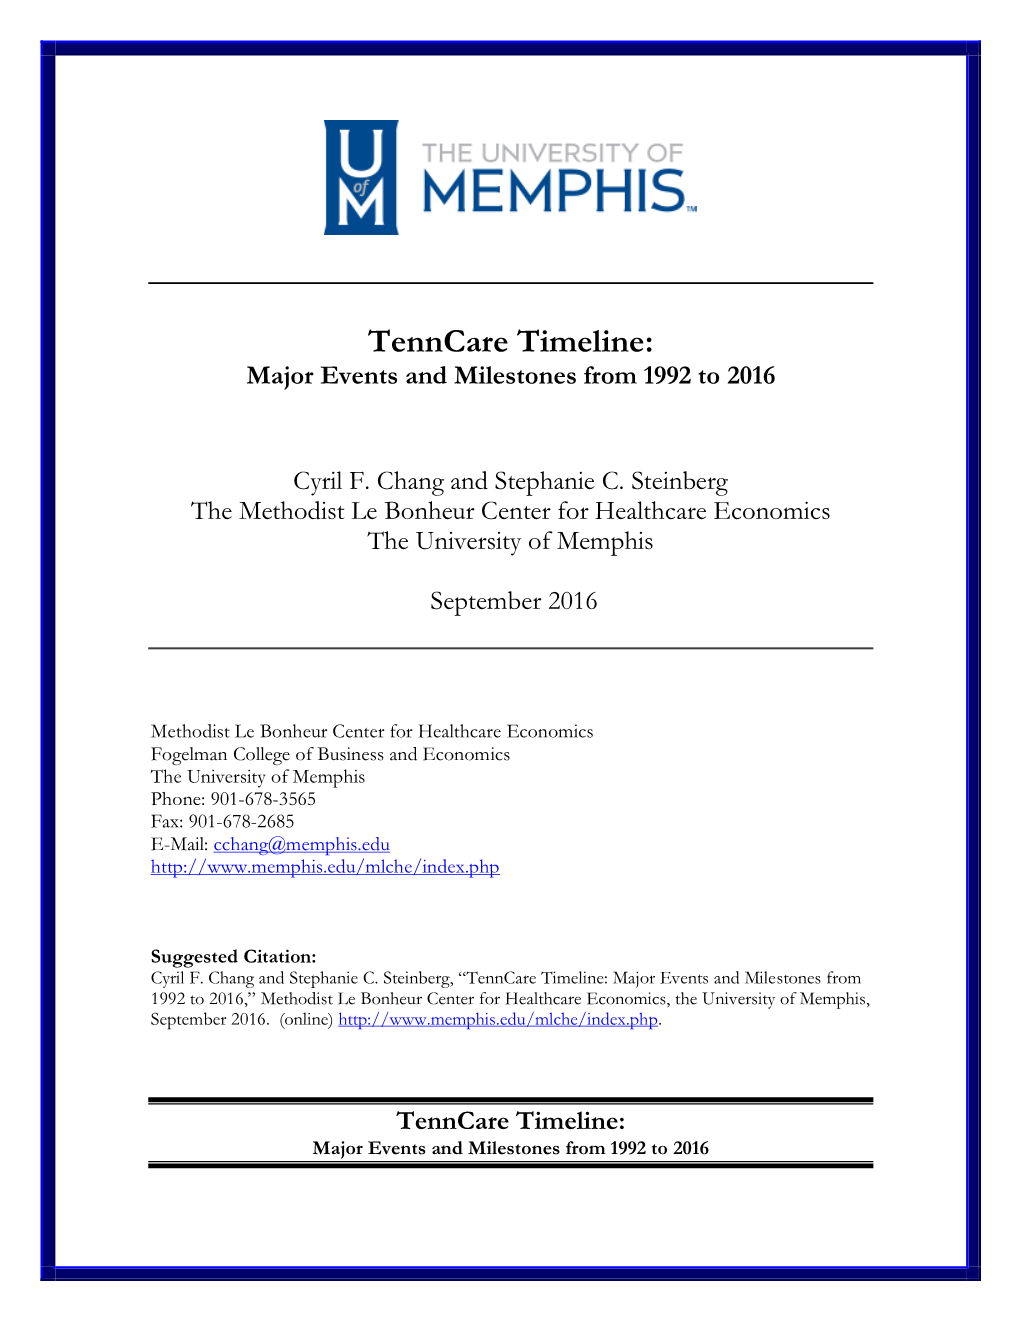 Tenncare Timeline: Major Events and Milestones from 1992 to 2016